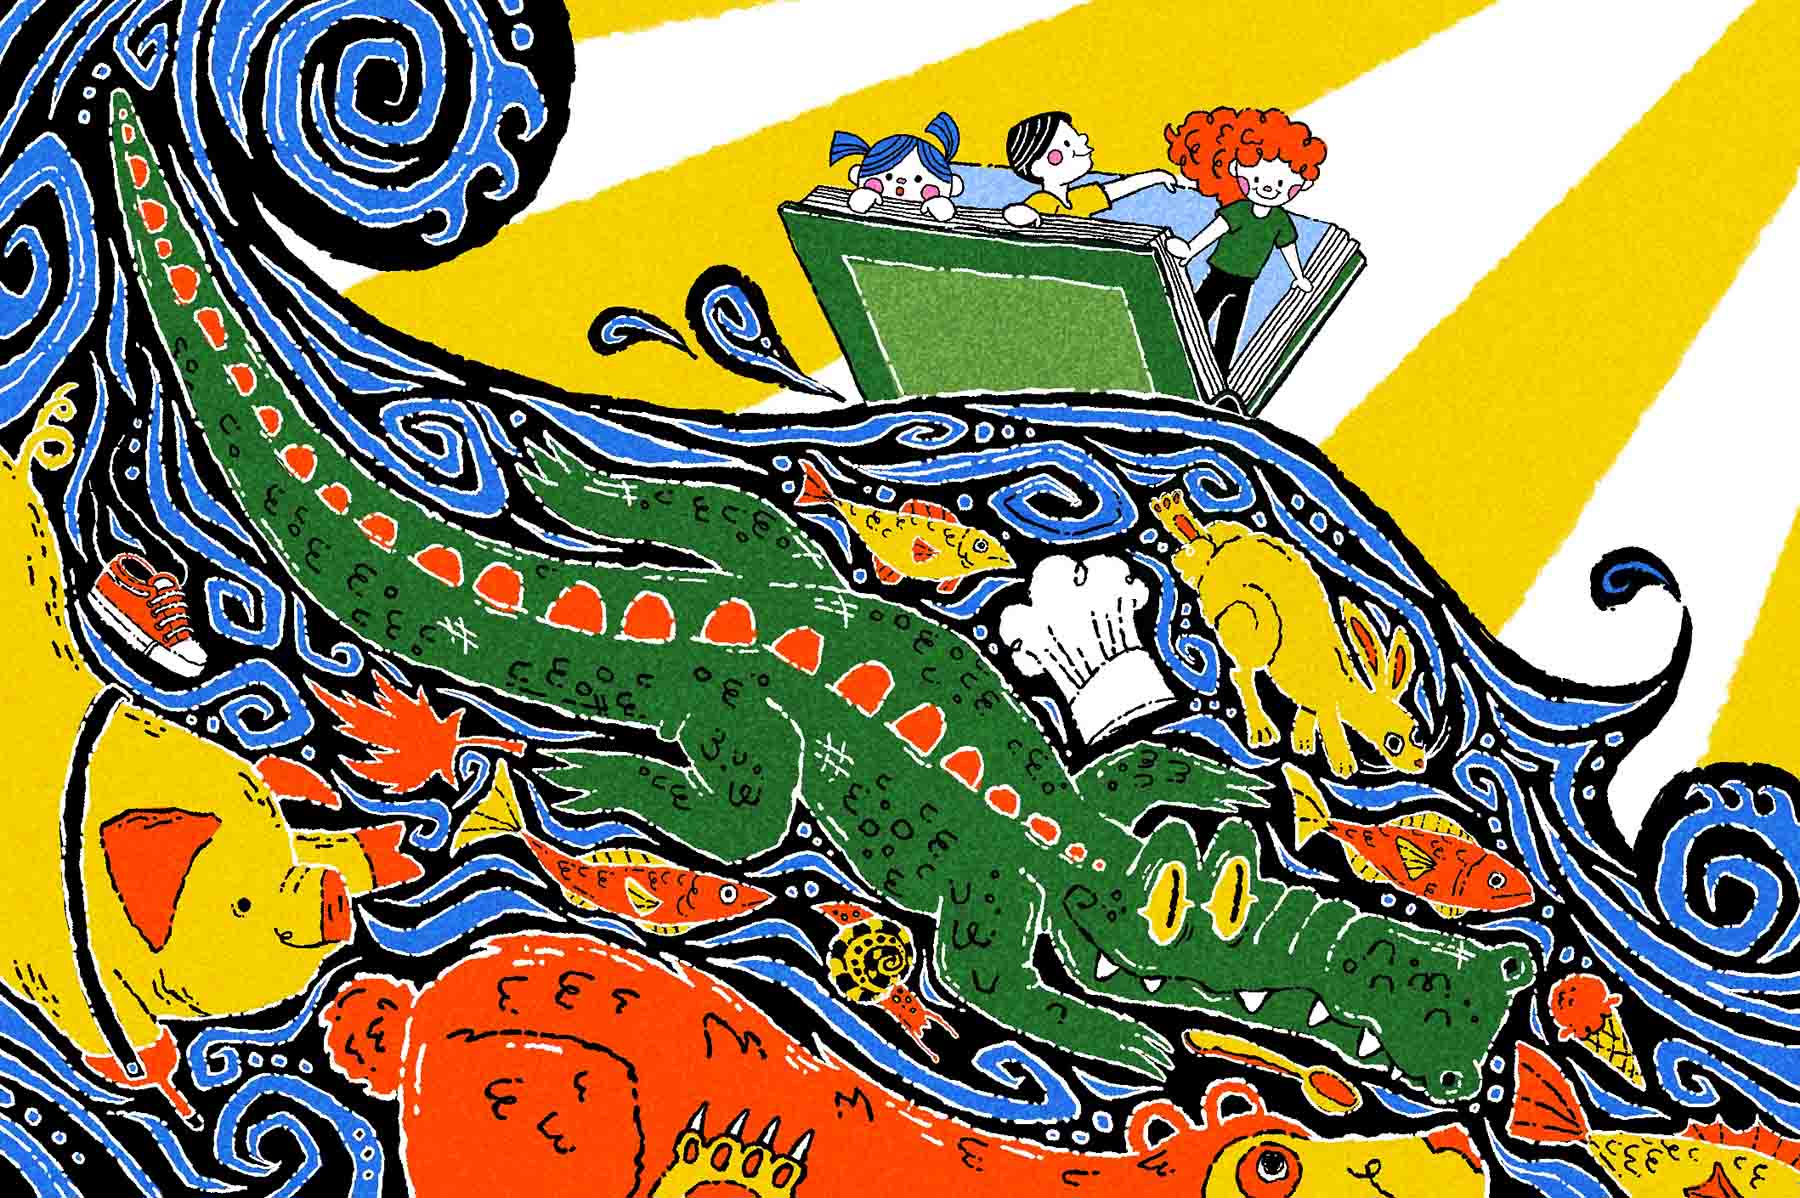 Three kids use a large book as a boat and ride a wave featuring an alligator, rabbit, pig, as well as a chef's hat in a vivid swirl of blue, orange, green and yellow.